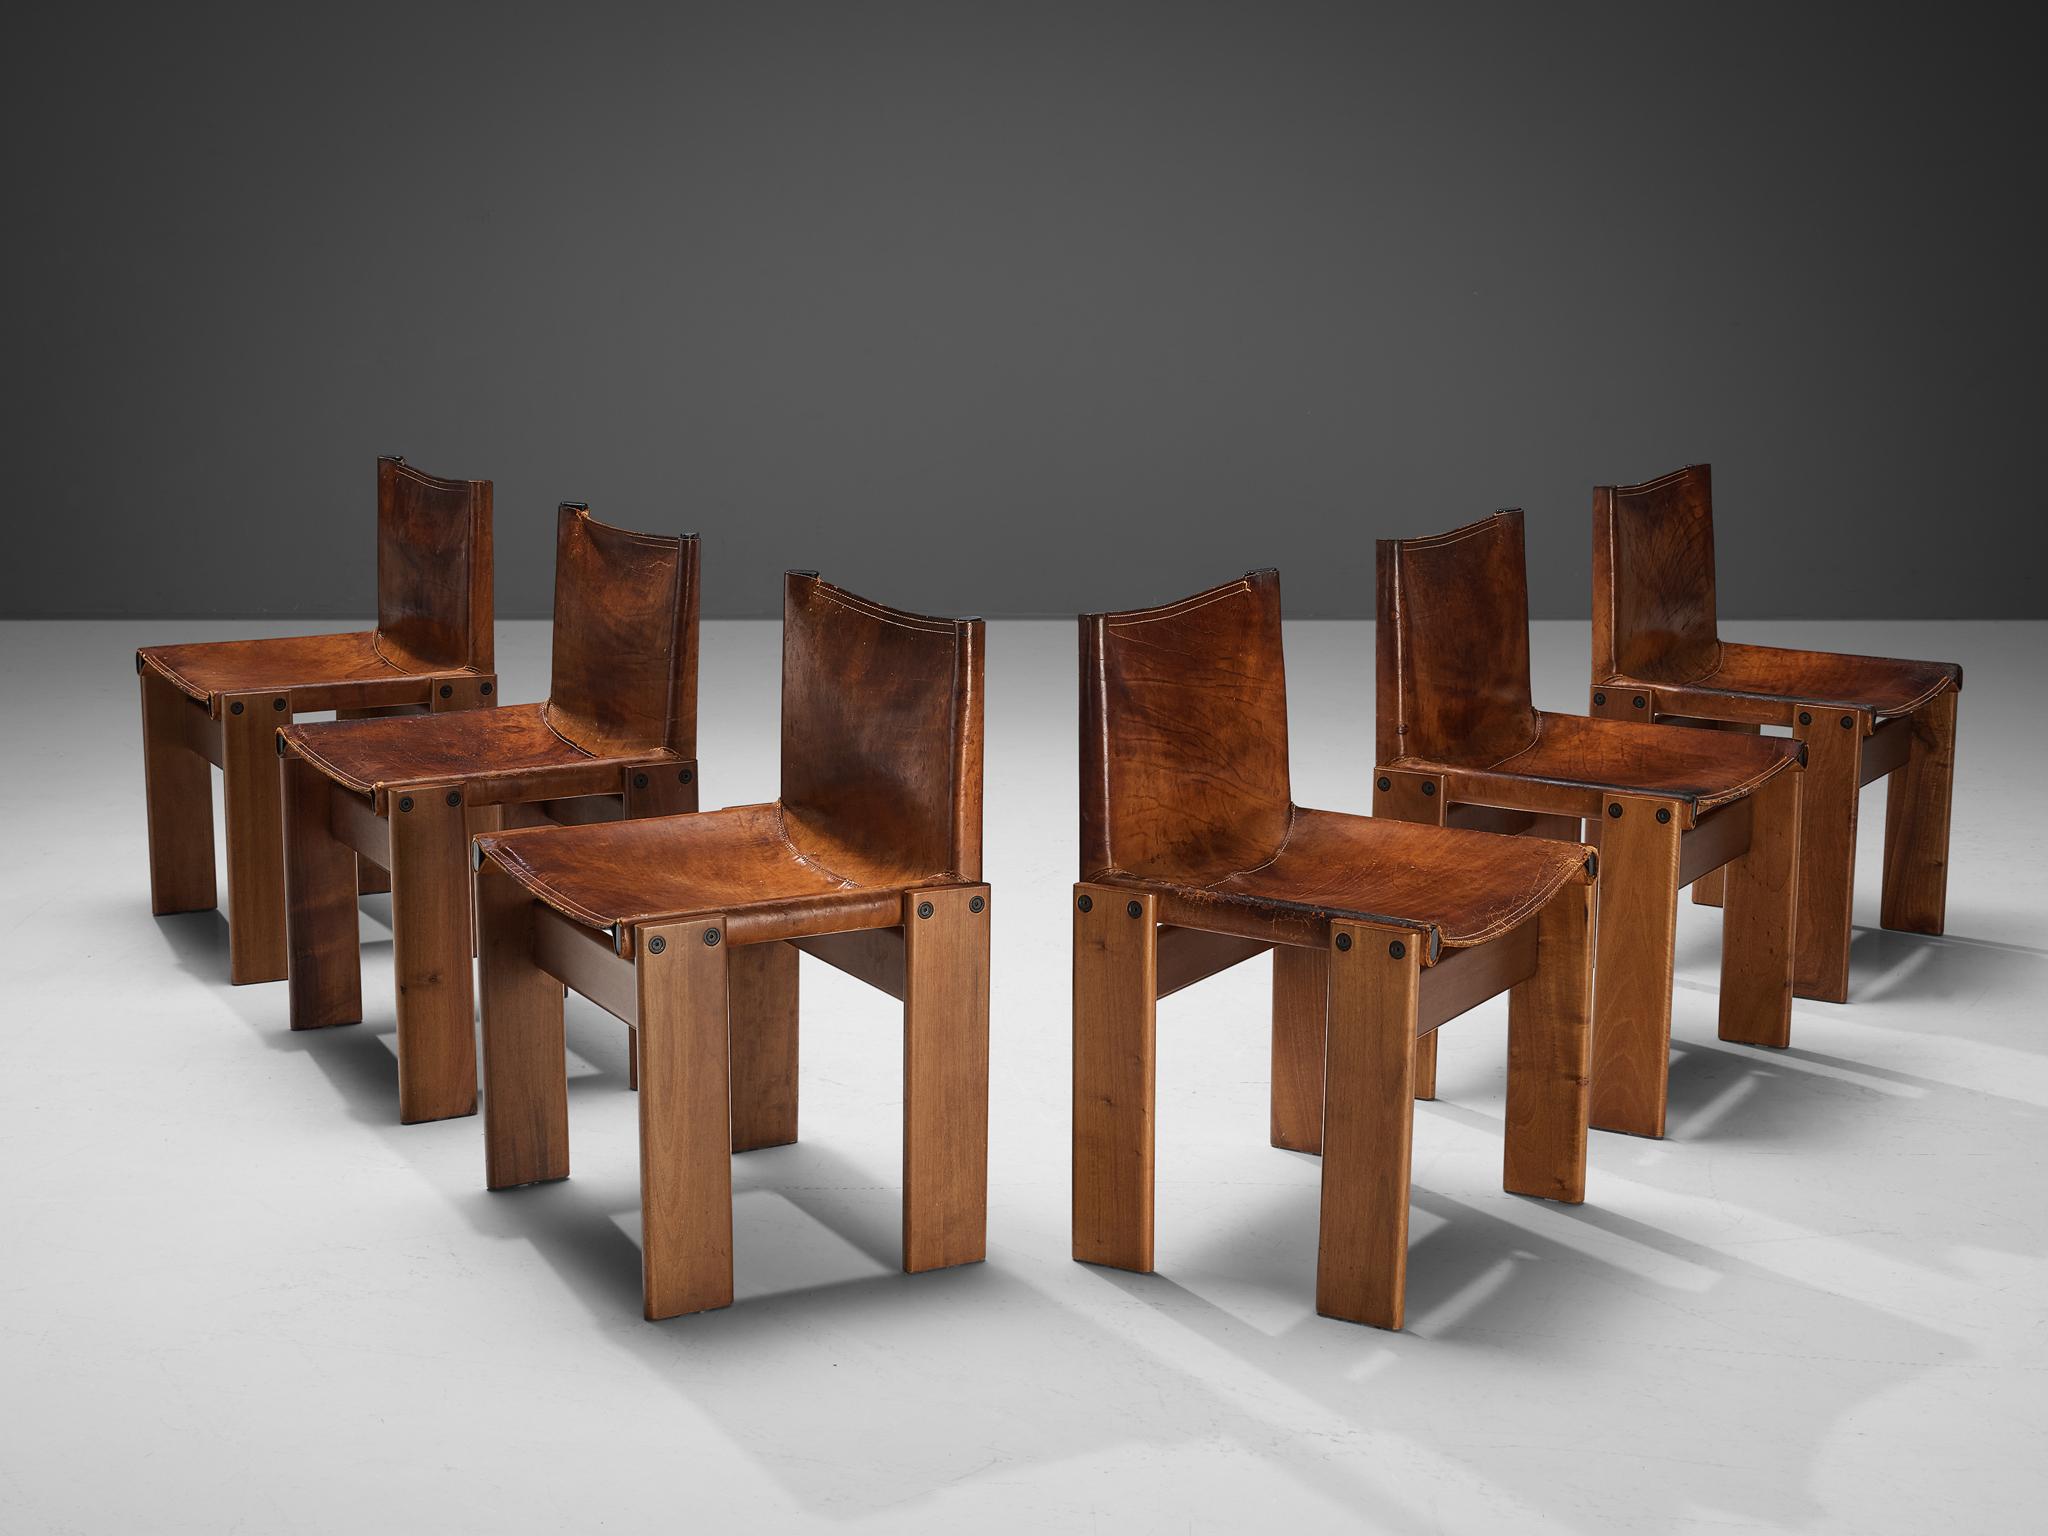 Afra & Tobia Scarpa for Molteni, 'Monk' dining chairs, walnut, cognac leather, Italy, 1974.

Set of six 'Monk' chairs by Italian designers Afra & Tobia Scarpa. The deep cognac leather shows beautiful patina and forms a striking combination with